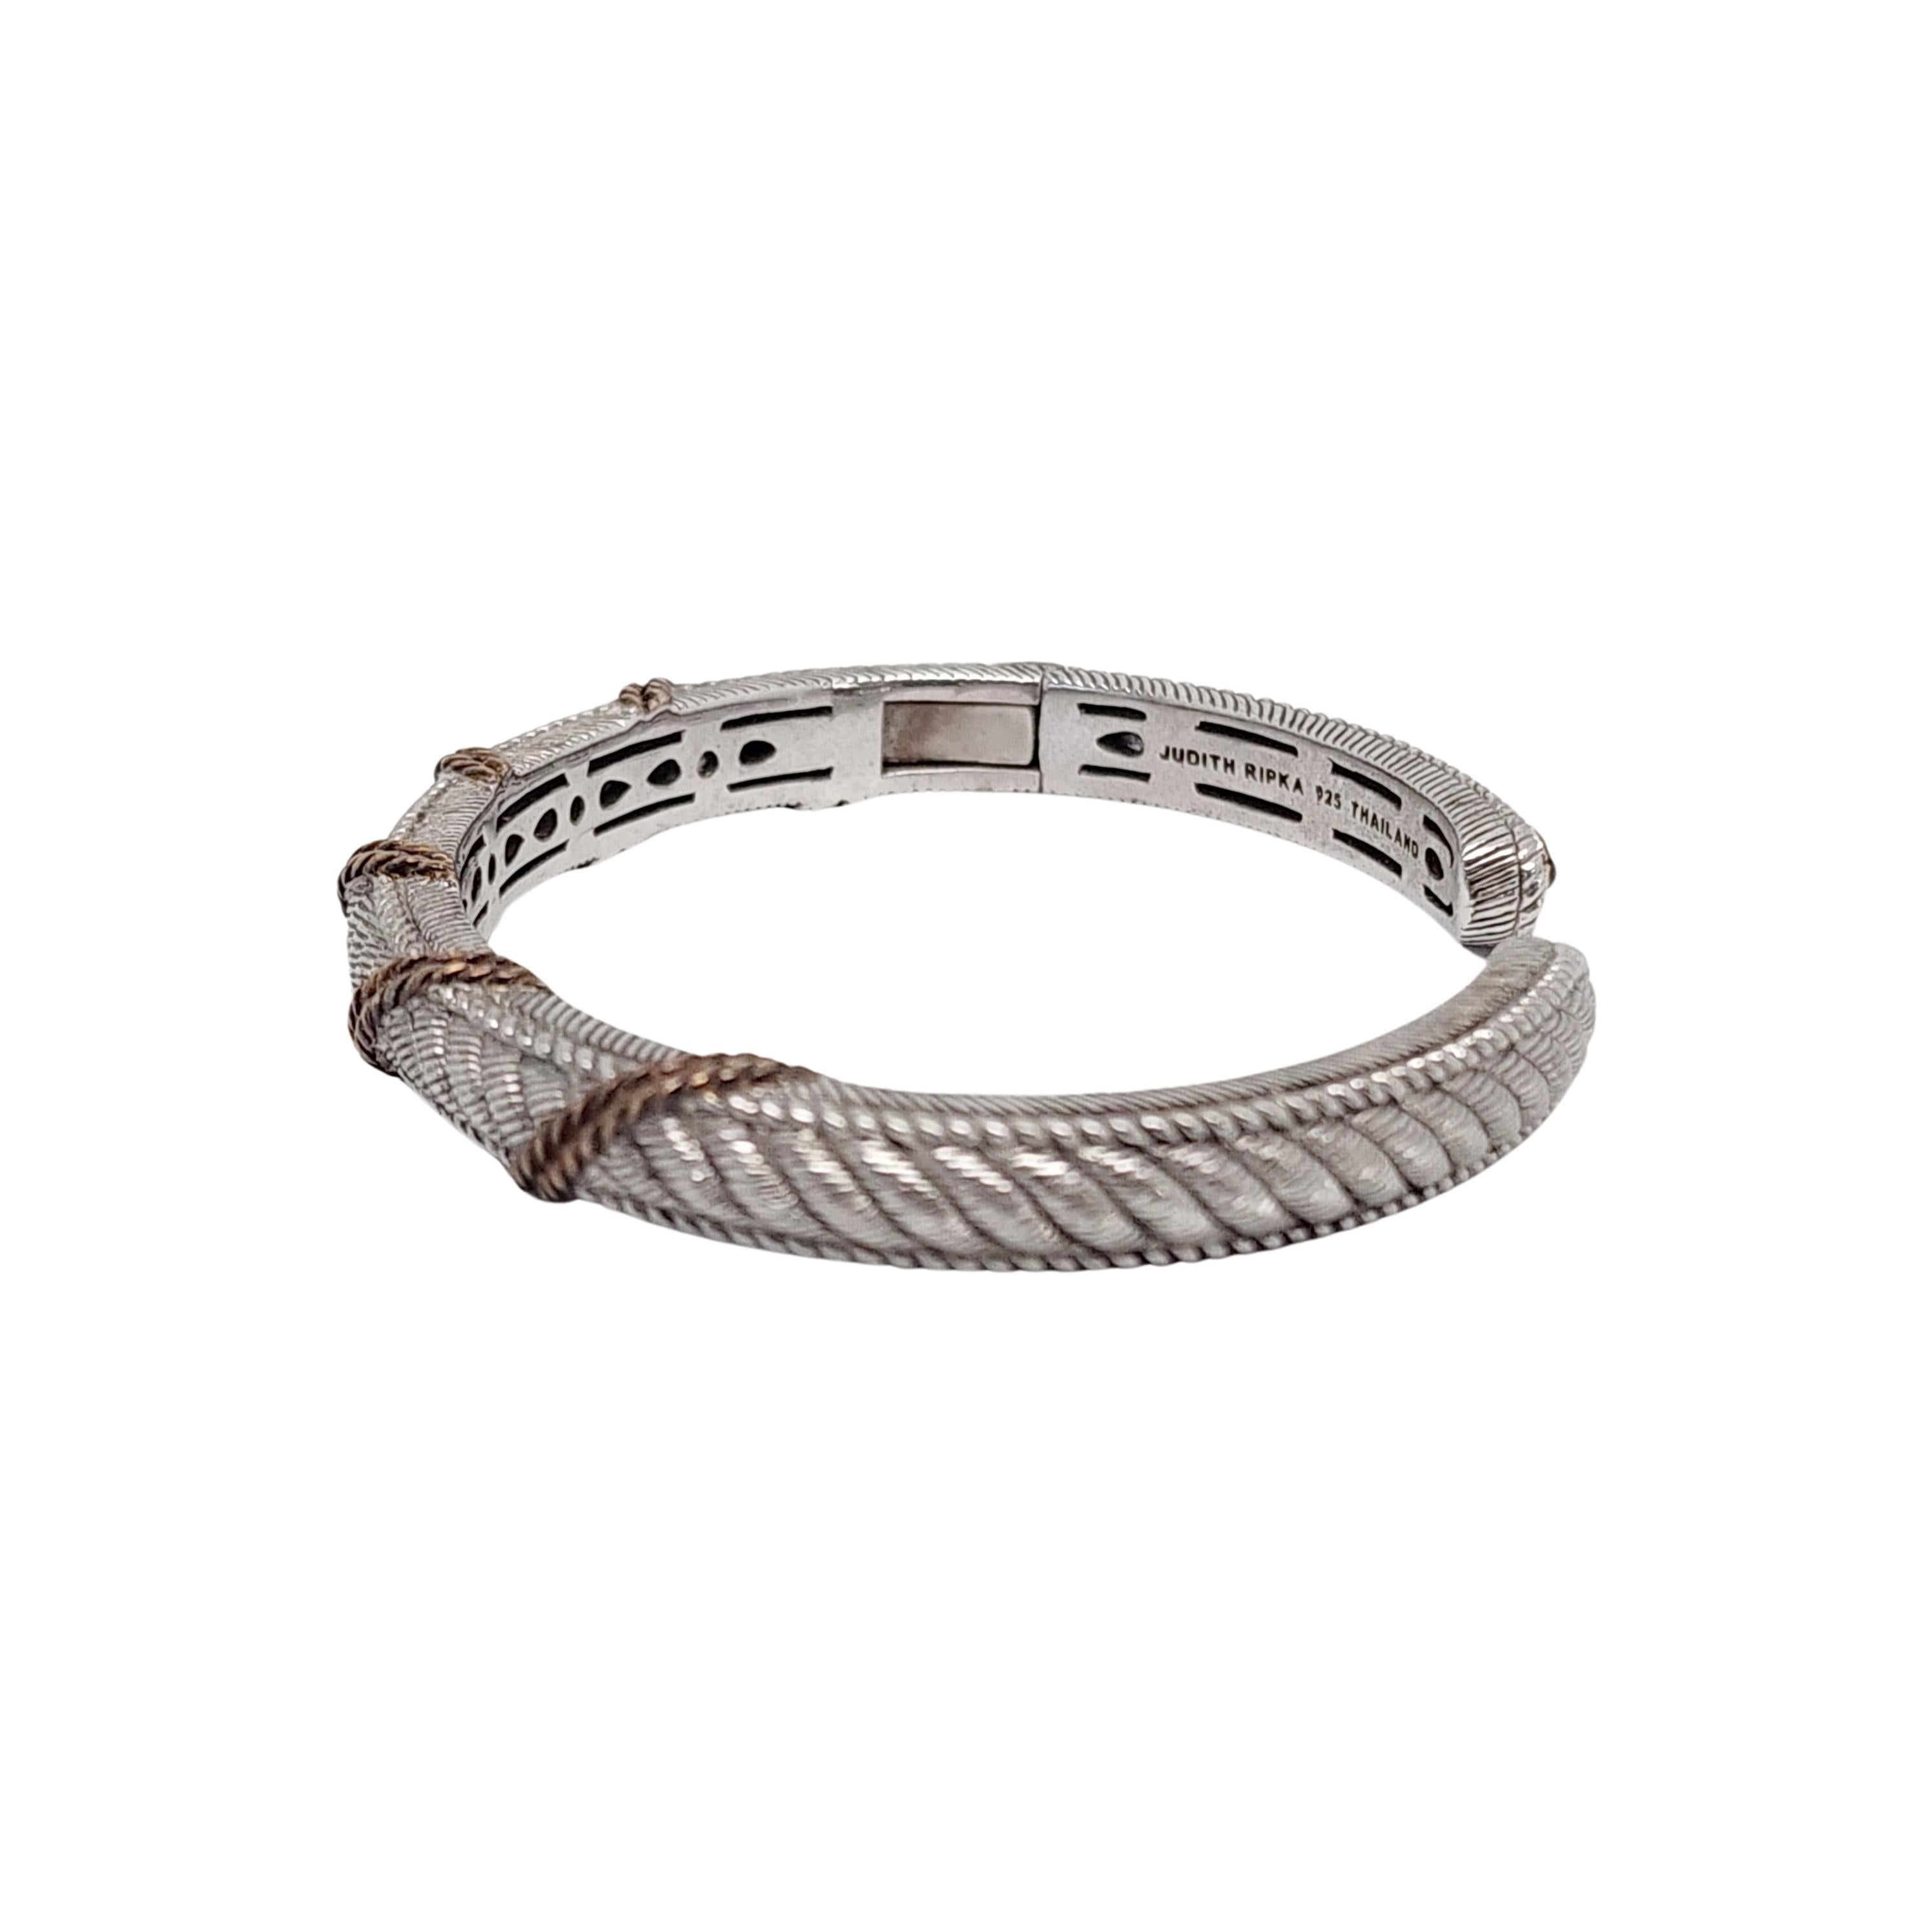 Judith Ripka sterling silver gold rope 2 tone hinged cuff bracelet

This bracelet features a textured sterling silver base with a gold tone rope accent. Hinged for ease of putting it on and taking it off.

Measures approx 5 1/2